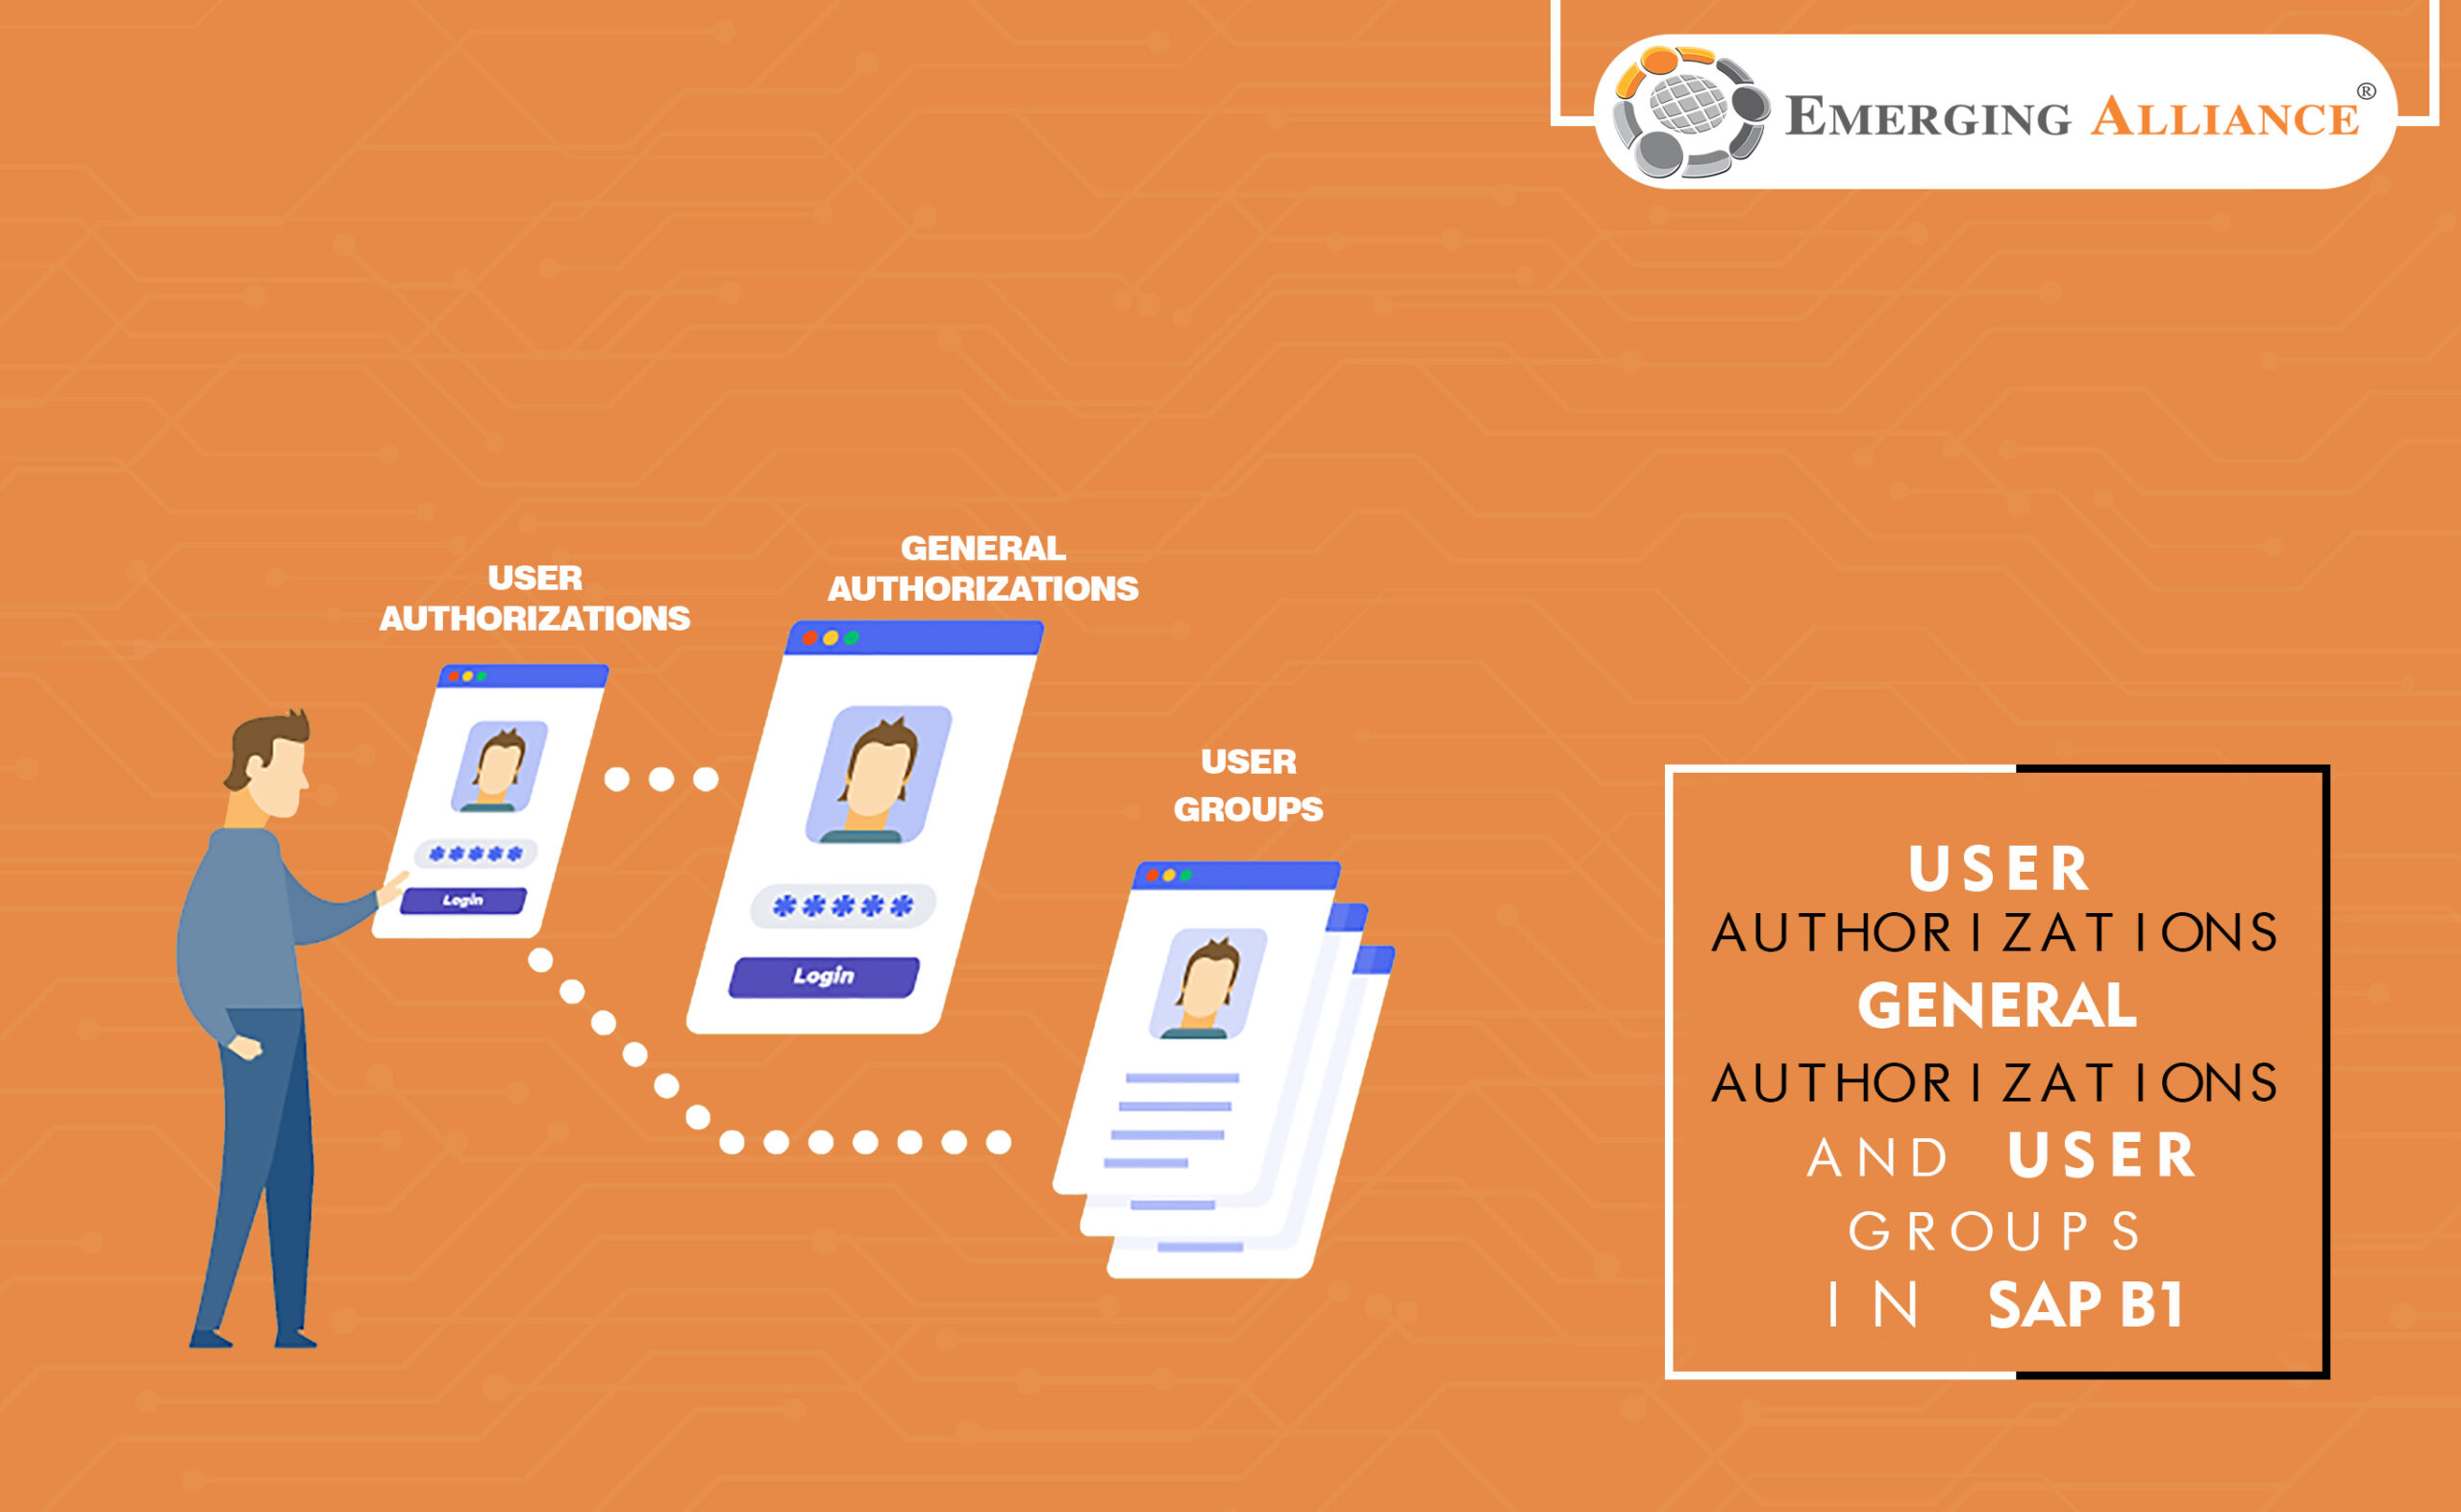 USER AUTHORIZATIONS, GENERAL AUTHORIZATIONS AND USER GROUPS IN SAP BUSINESS ONE